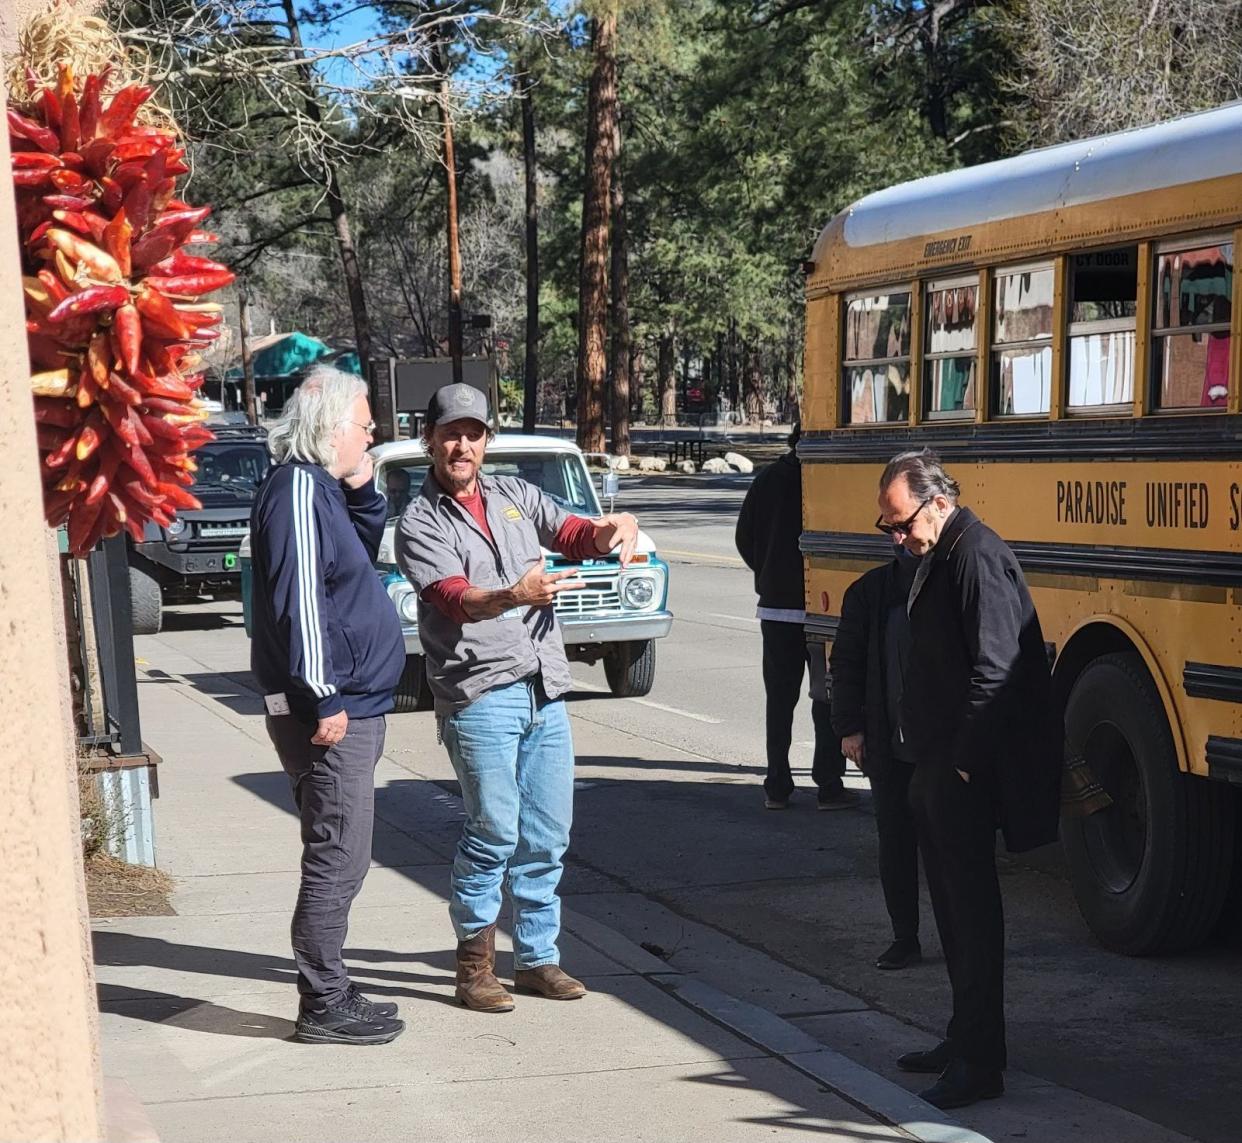 Matthew McConaughey seen in Ruidoso, New Mexico. Film crews were in Ruidoso to produce the movie “The Lost Bus” from April 1 to April 7.